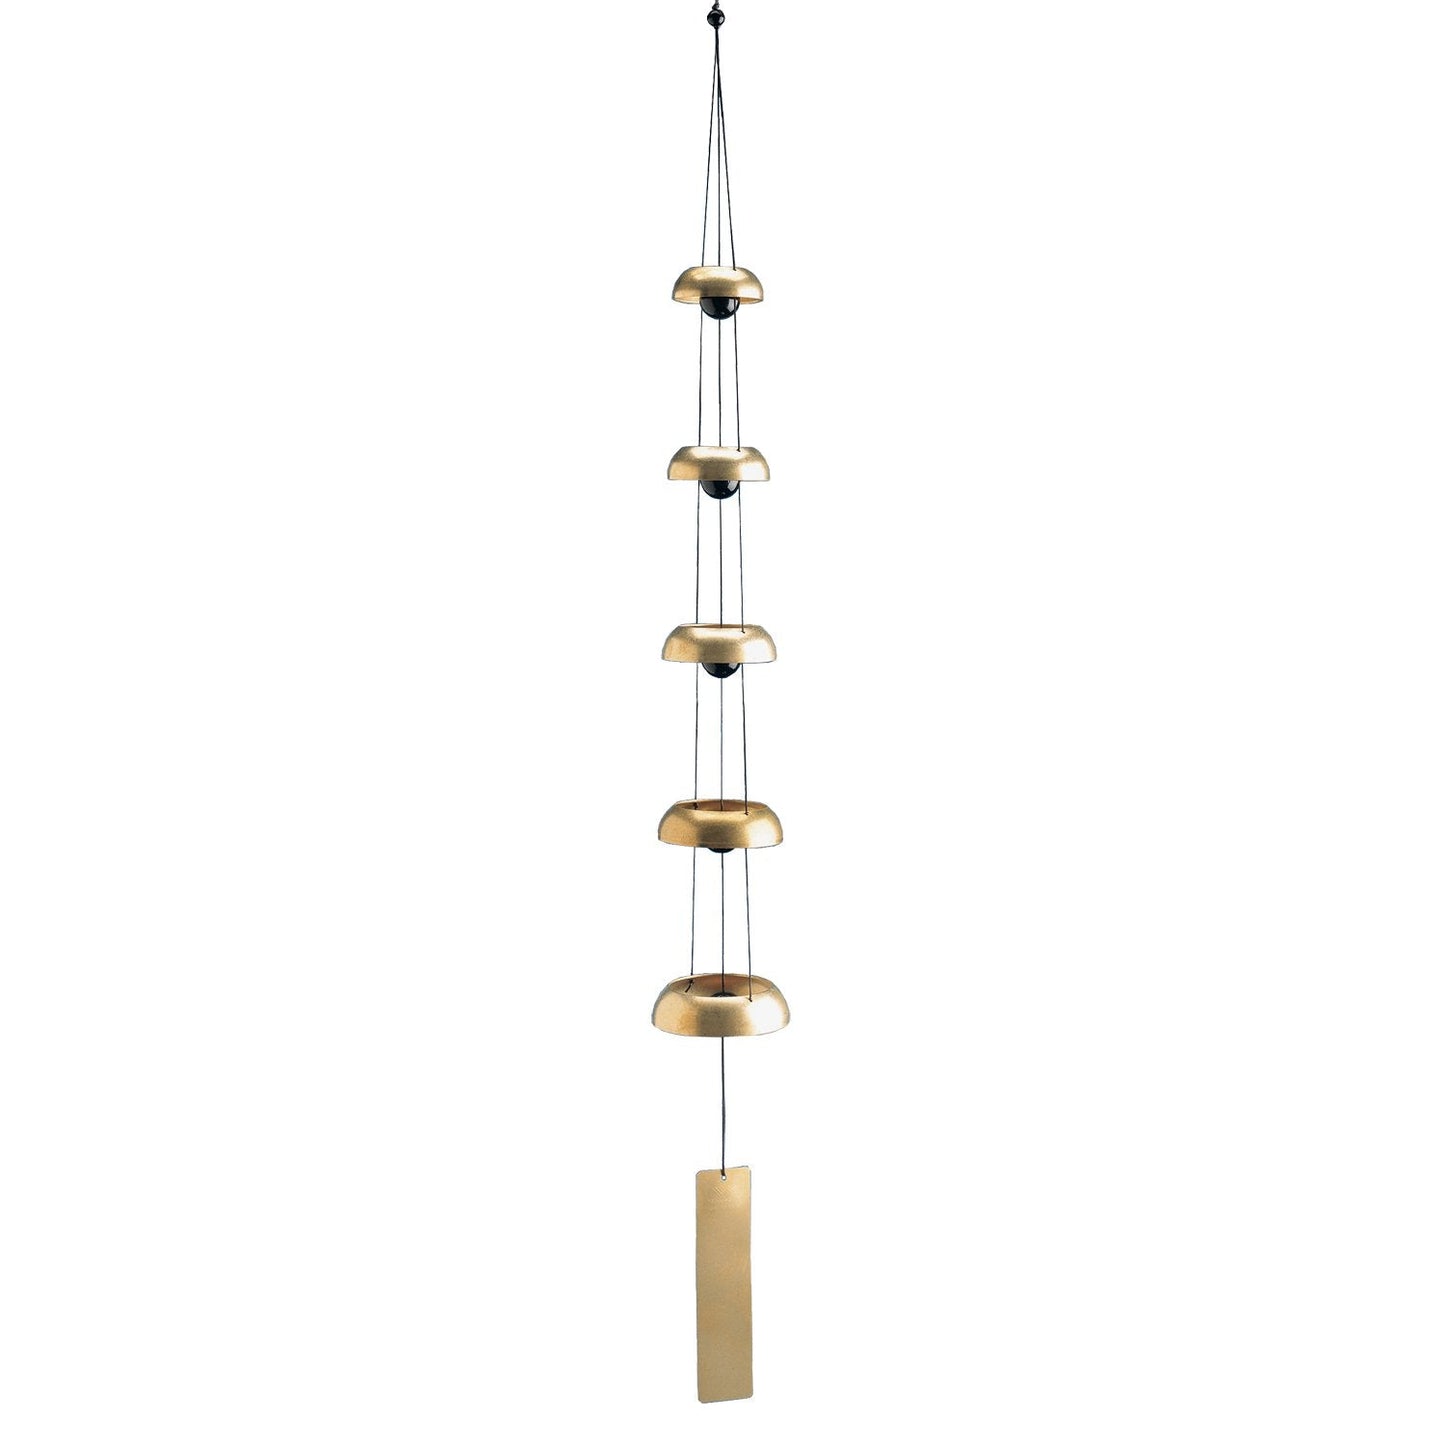 Temple Bells - Quintet, Brass - by Woodstock Chimes